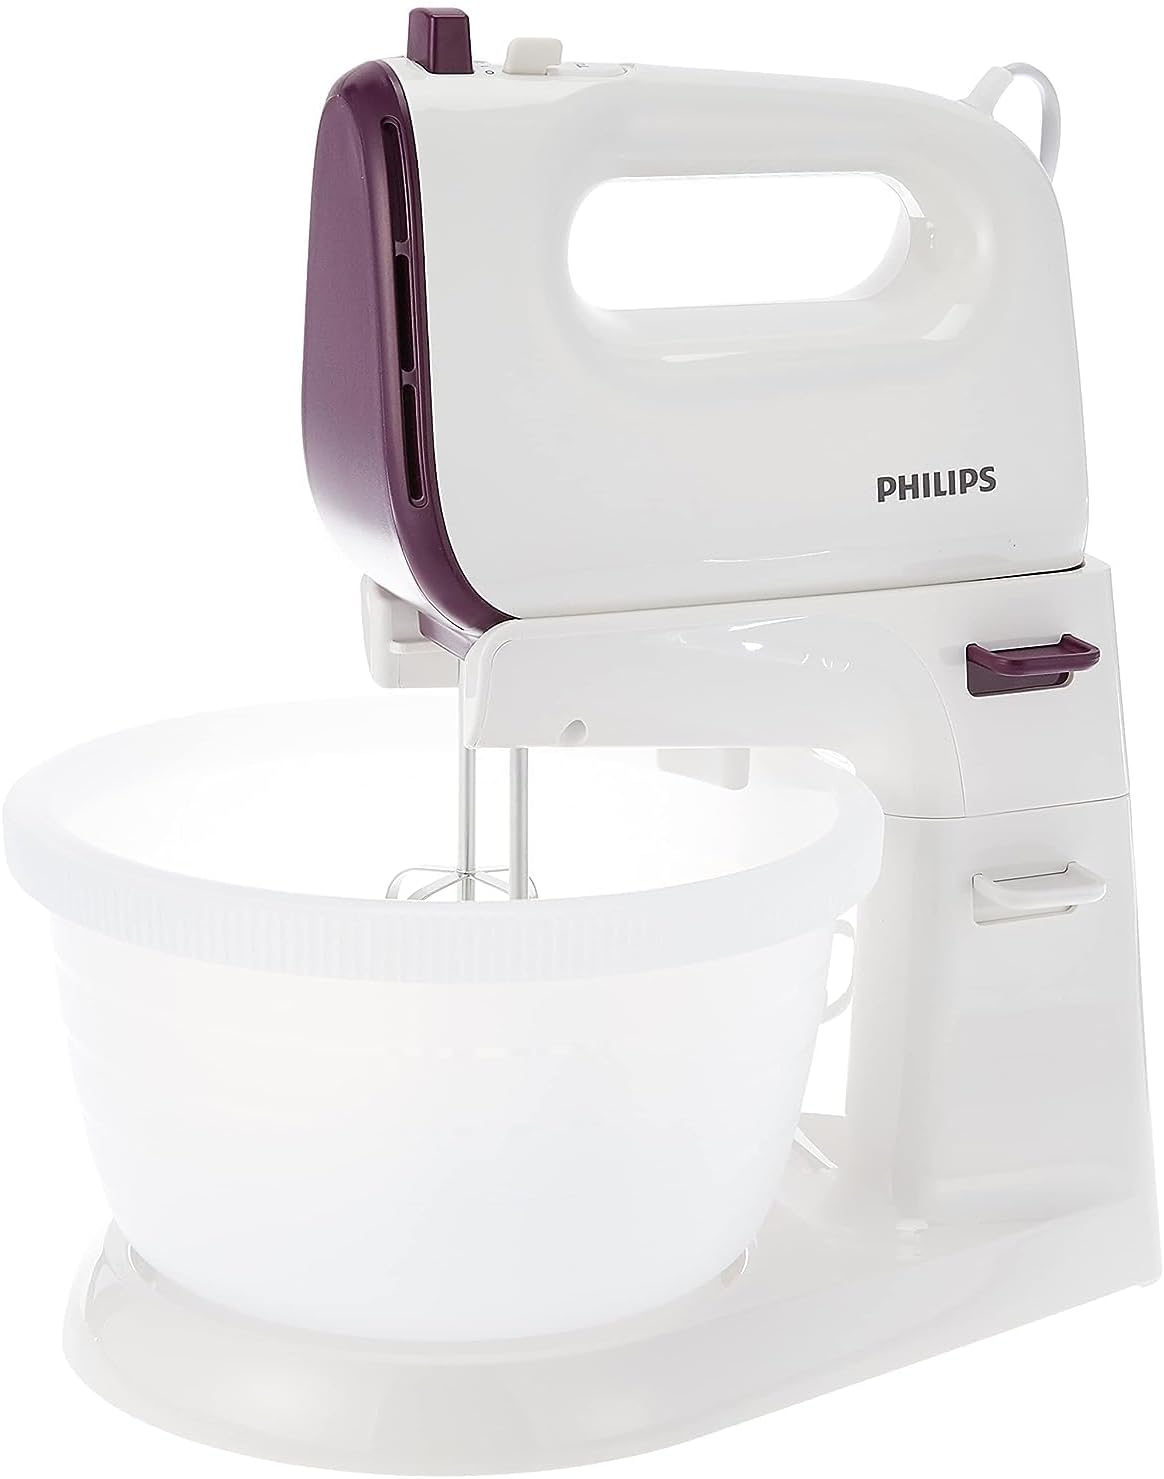 Philips Hand Mixer 300W - HR3705 | Supply Master Accra, Ghana Kitchen Appliances Buy Tools hardware Building materials